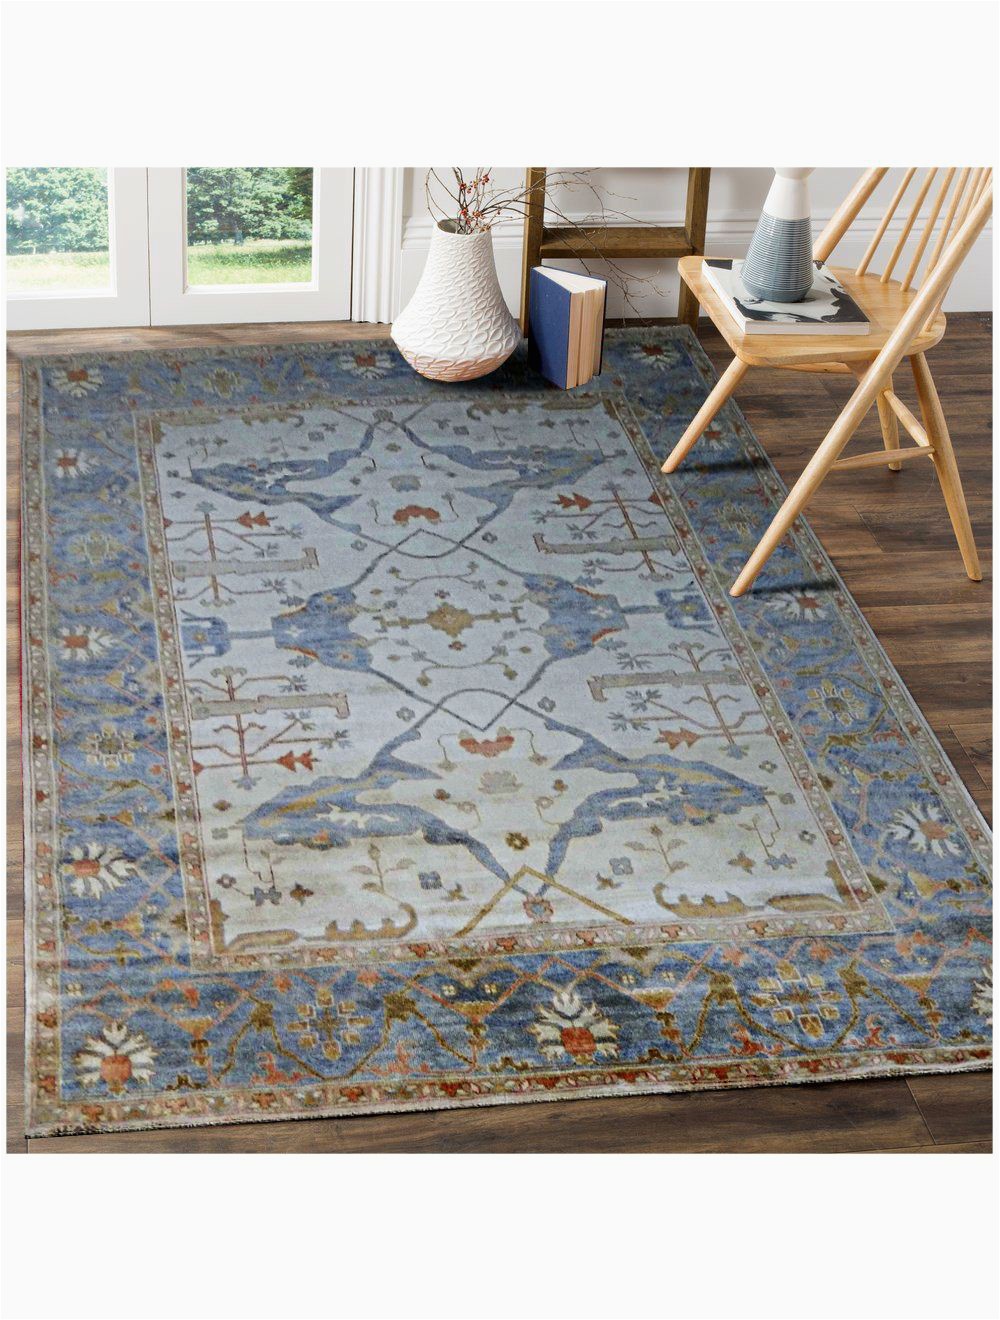 aldo persian traditional floral blue hand knotted wool rug 4 x 6